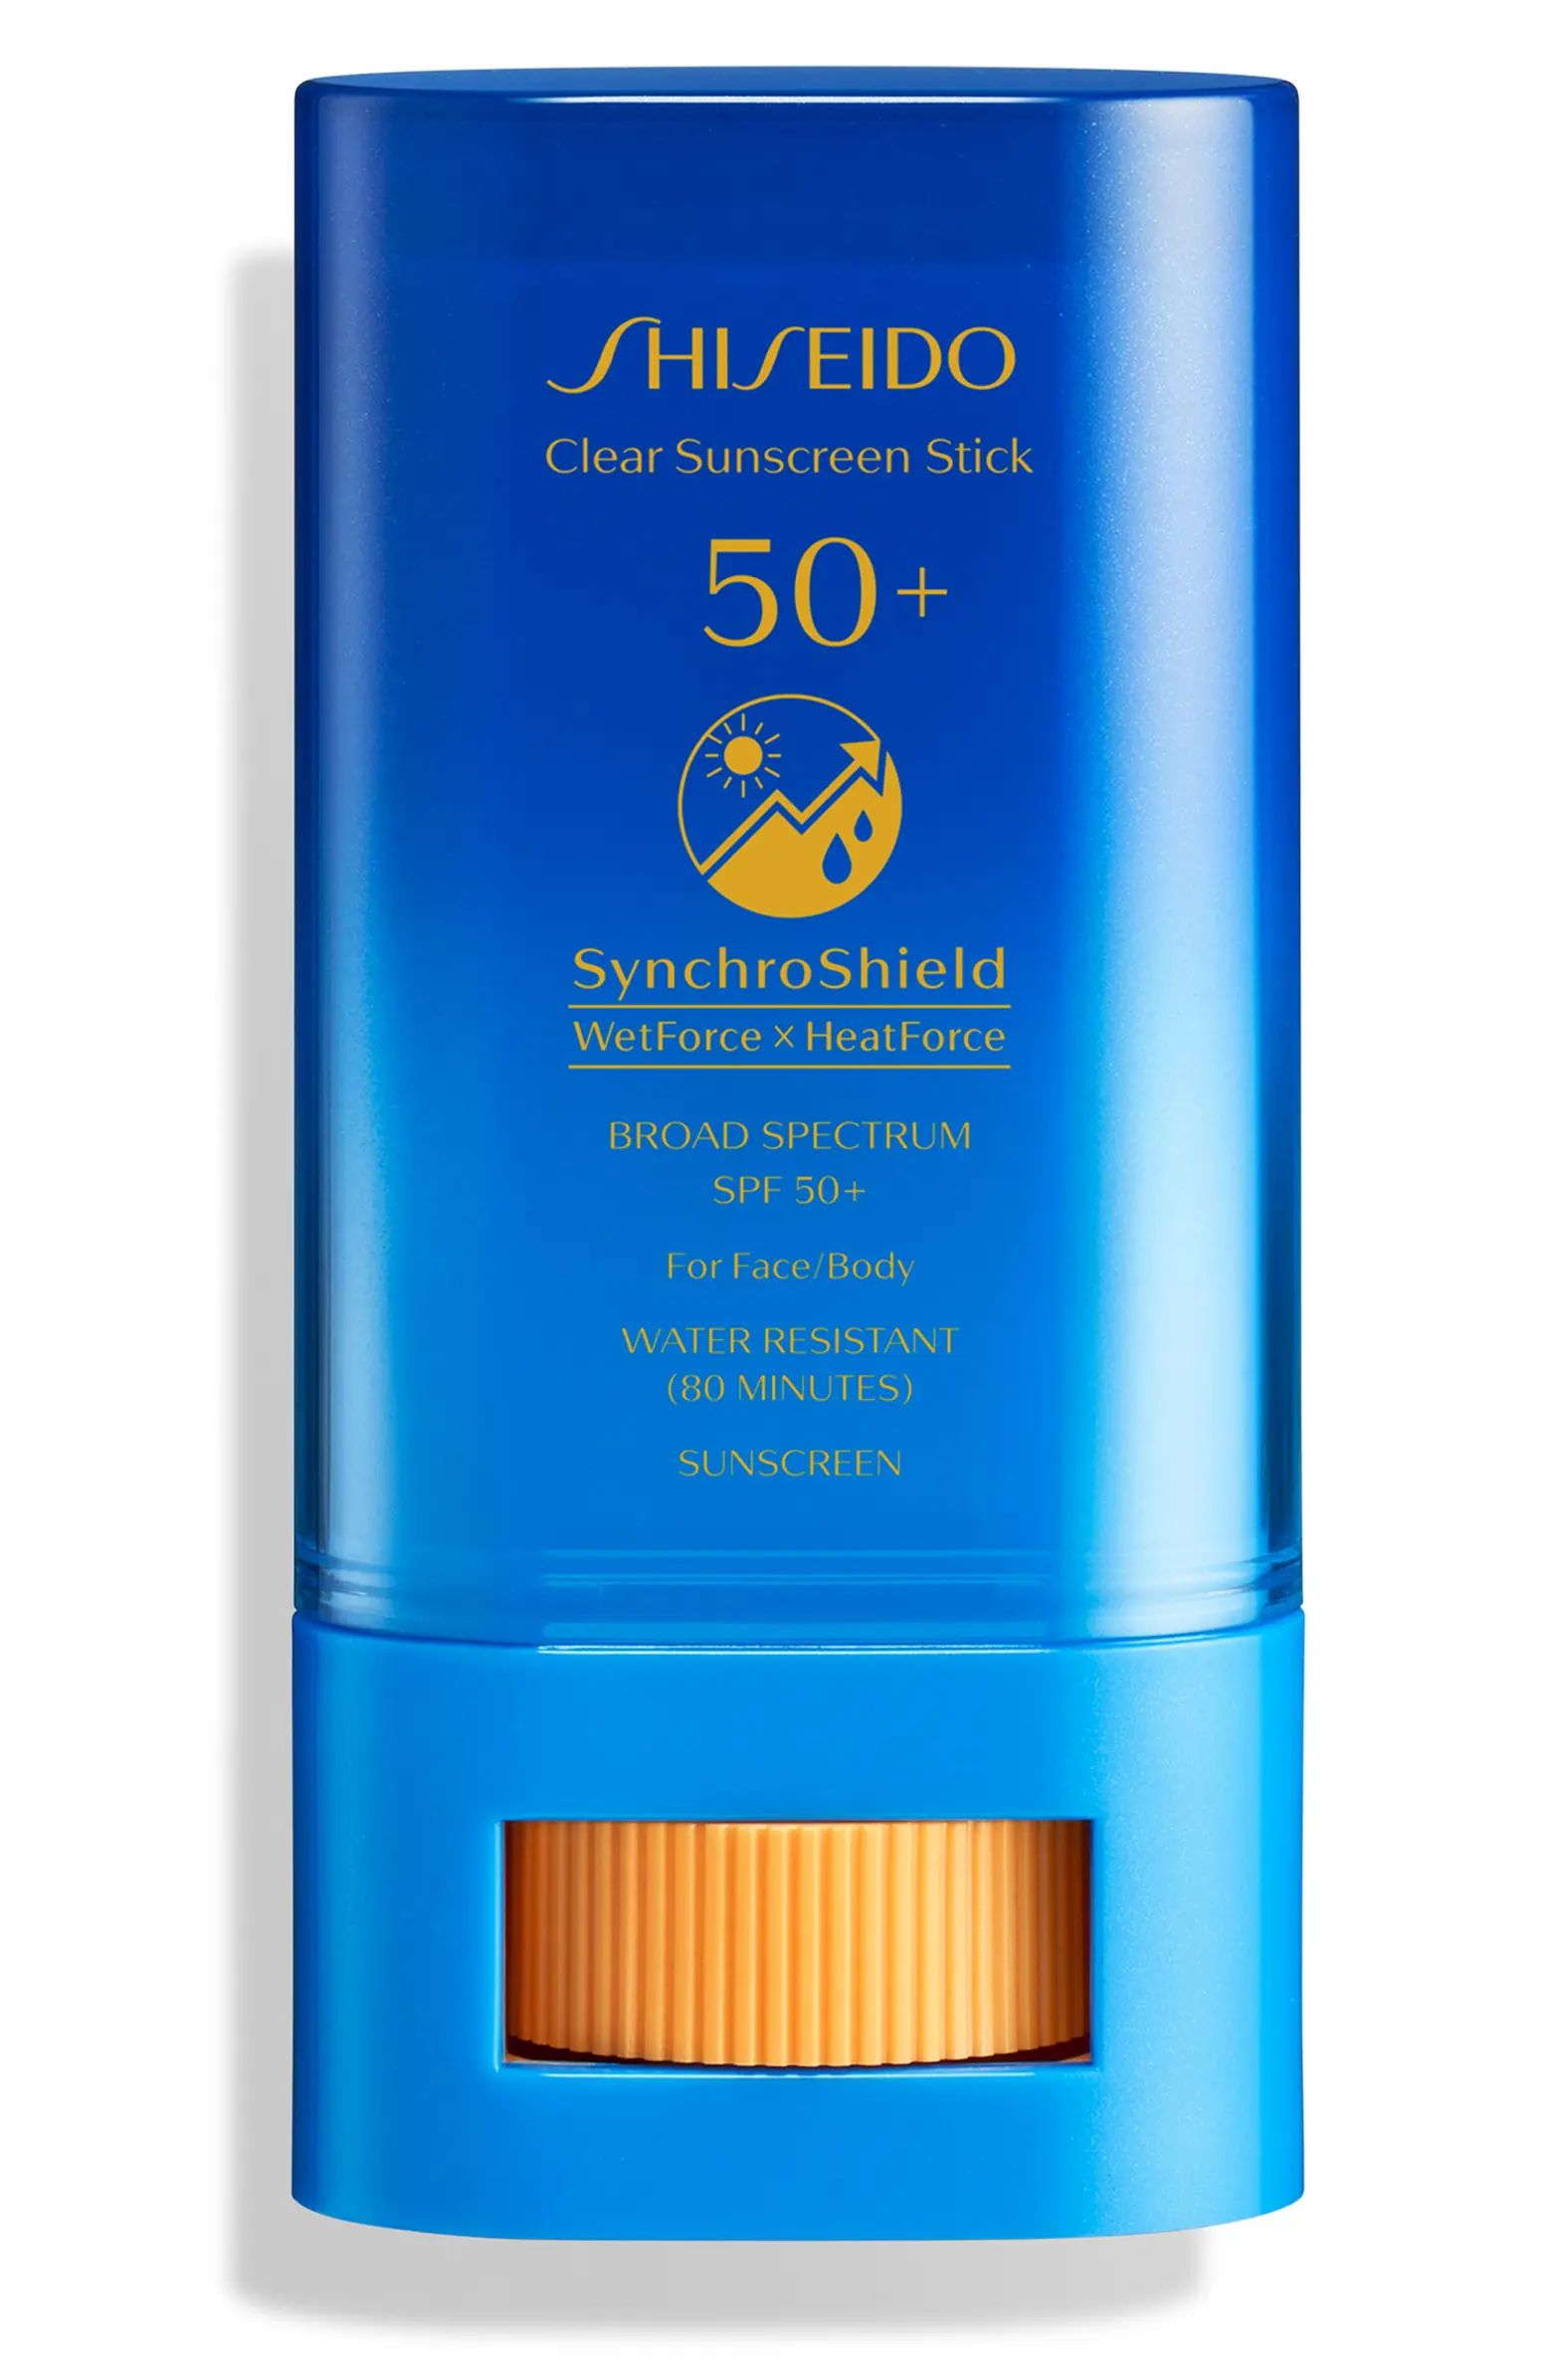 Clear Sunscreen Stick SPF 50+ for Face & Body | Nordstrom